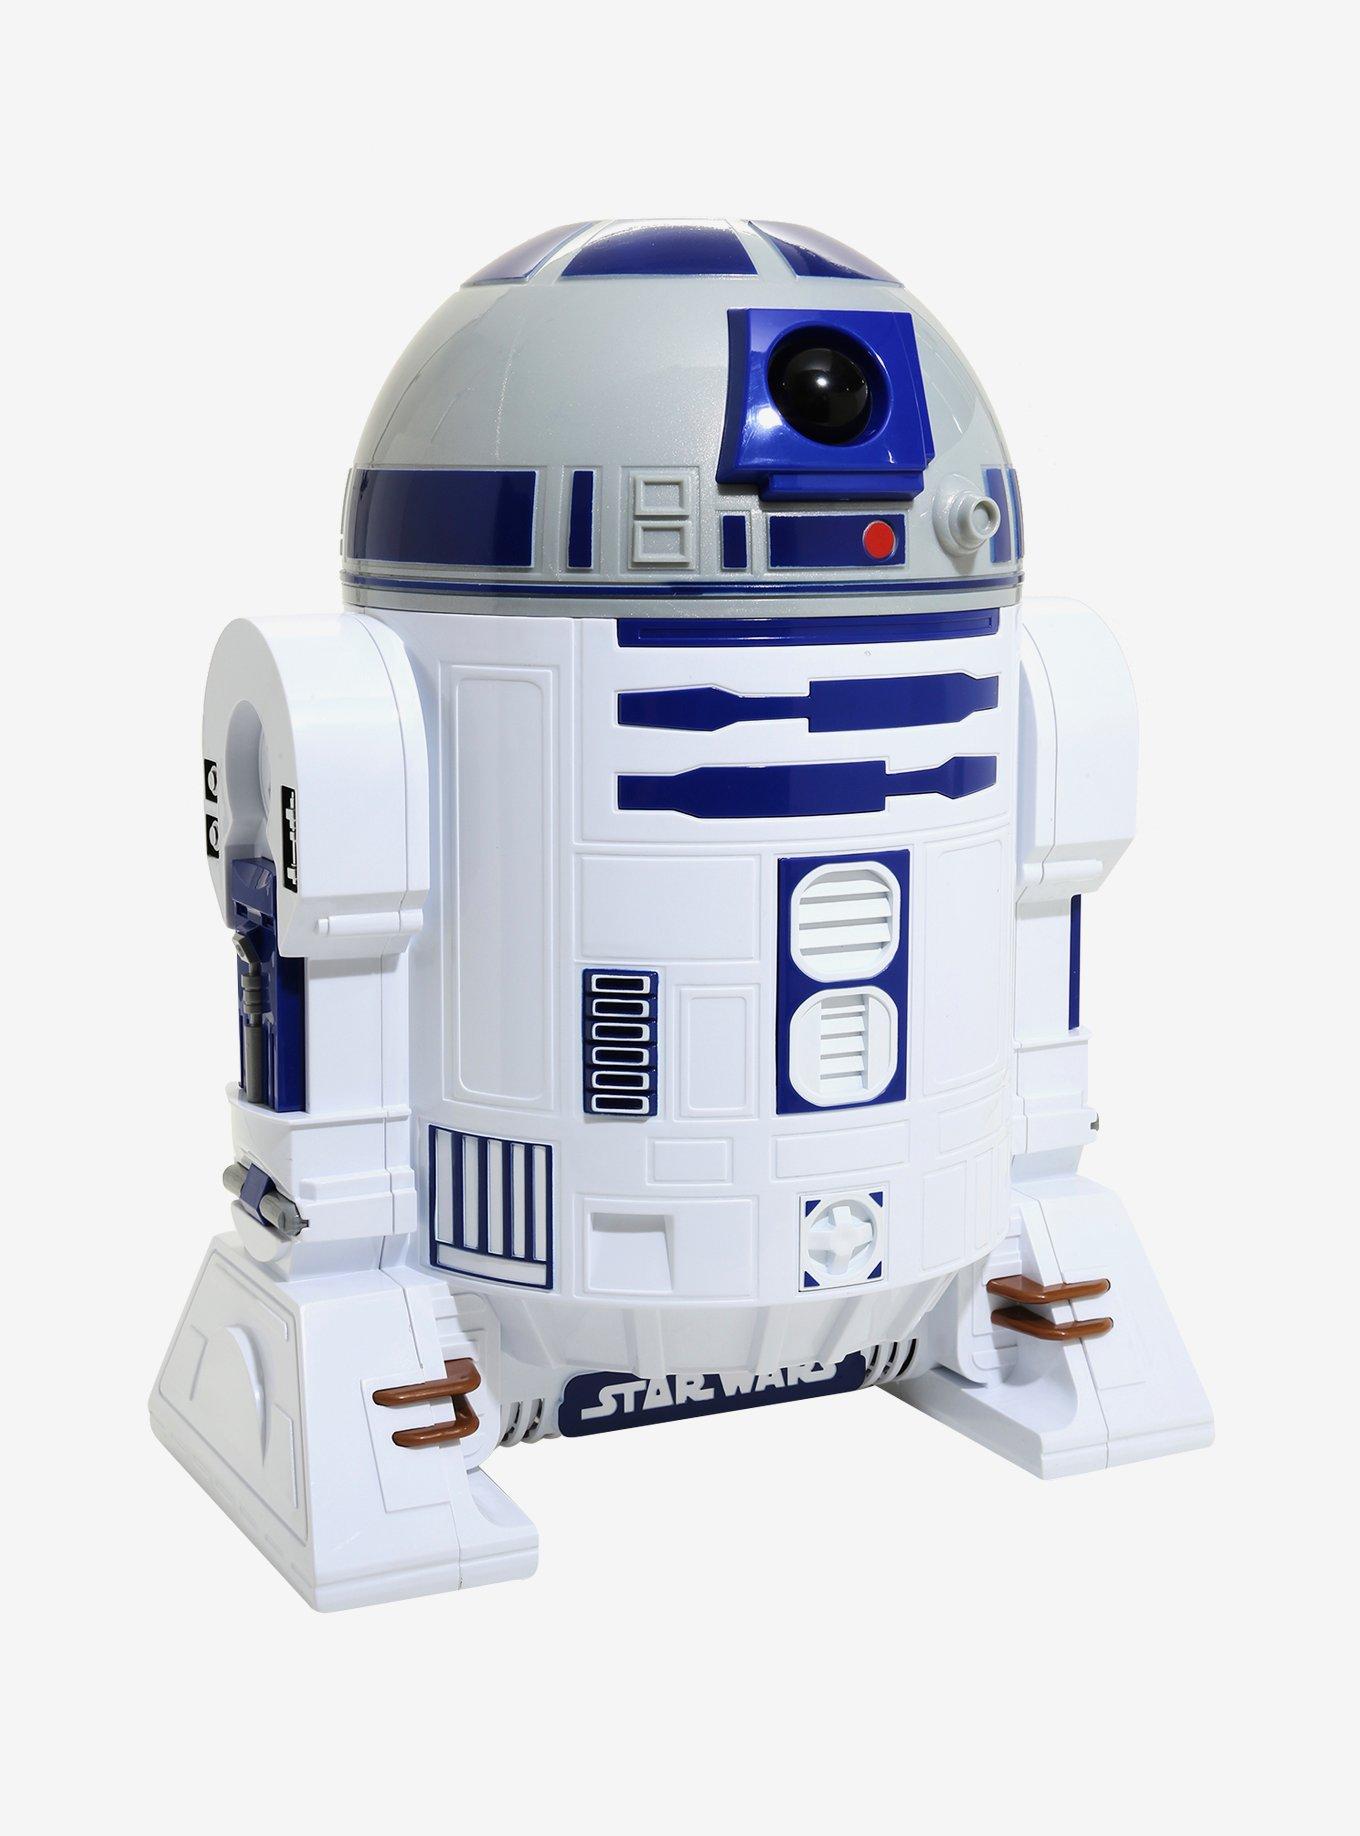 Exclusive R2-D2 Droid Popcorn And Drink Combo